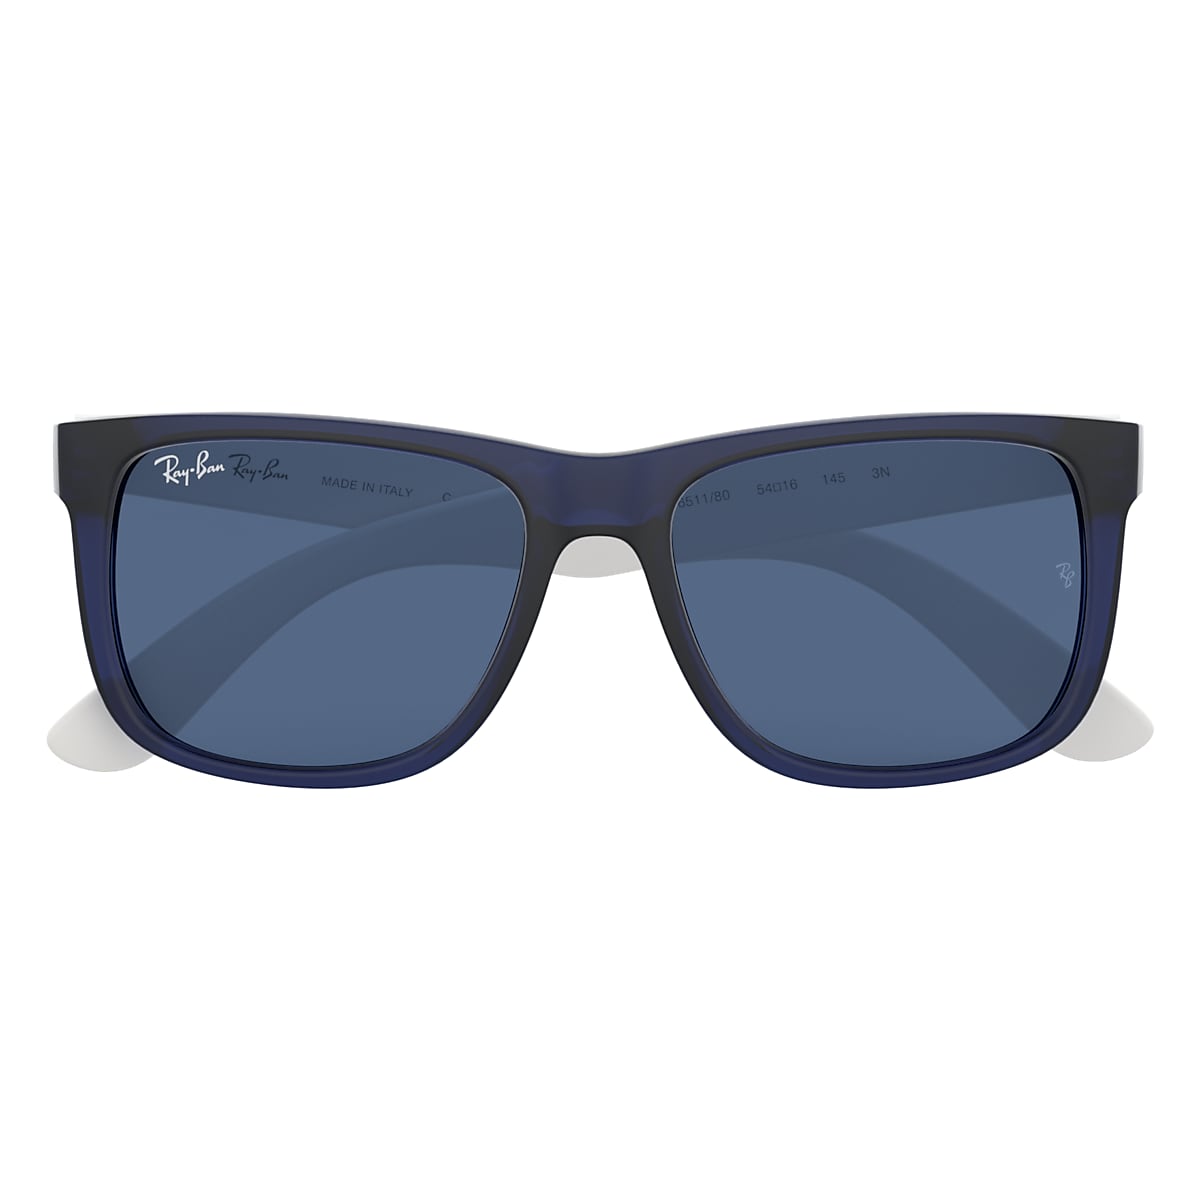 Ramen wassen lava schors Justin Color Mix Sunglasses in Transparent Blue and Dark Blue - RB4165 | Ray -Ban® US